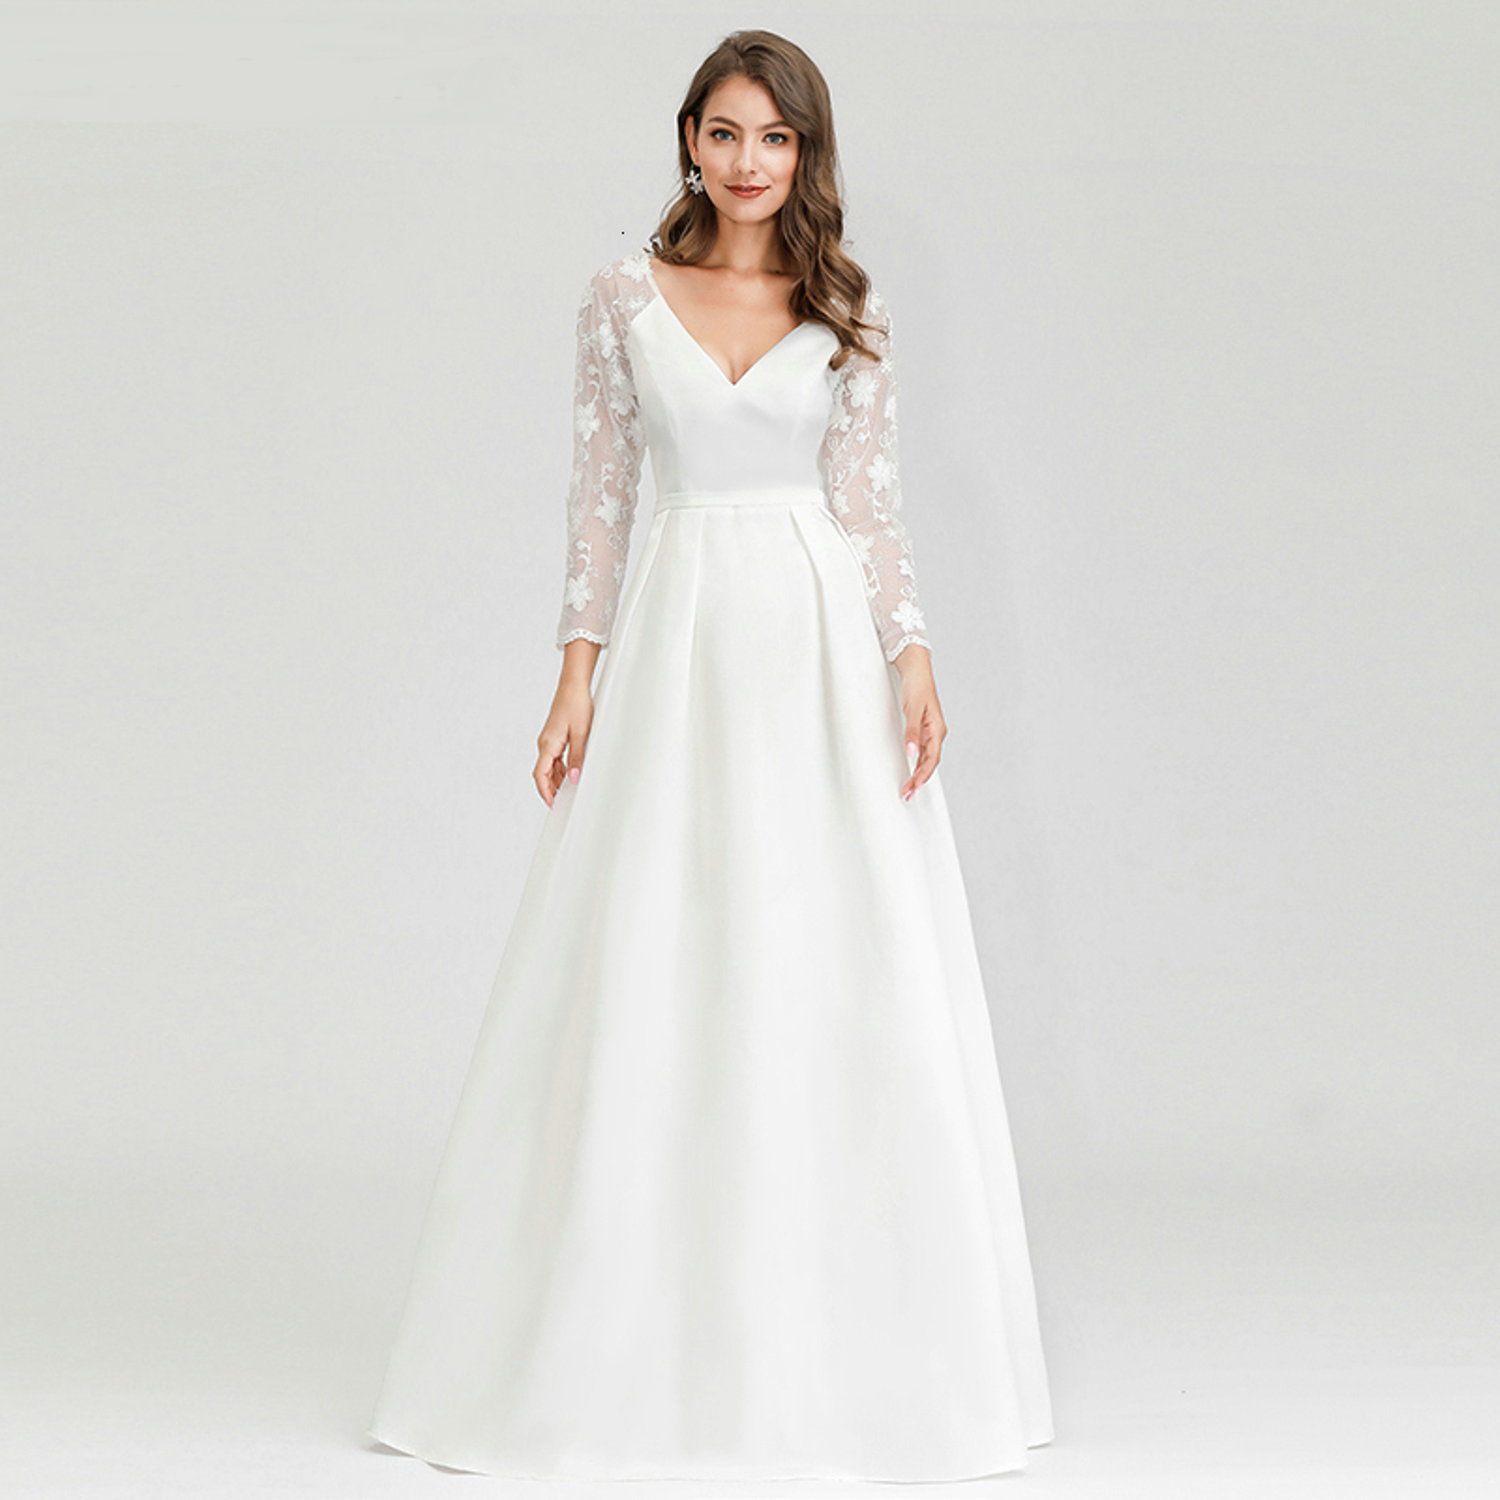 A-line wedding dress with sleeves